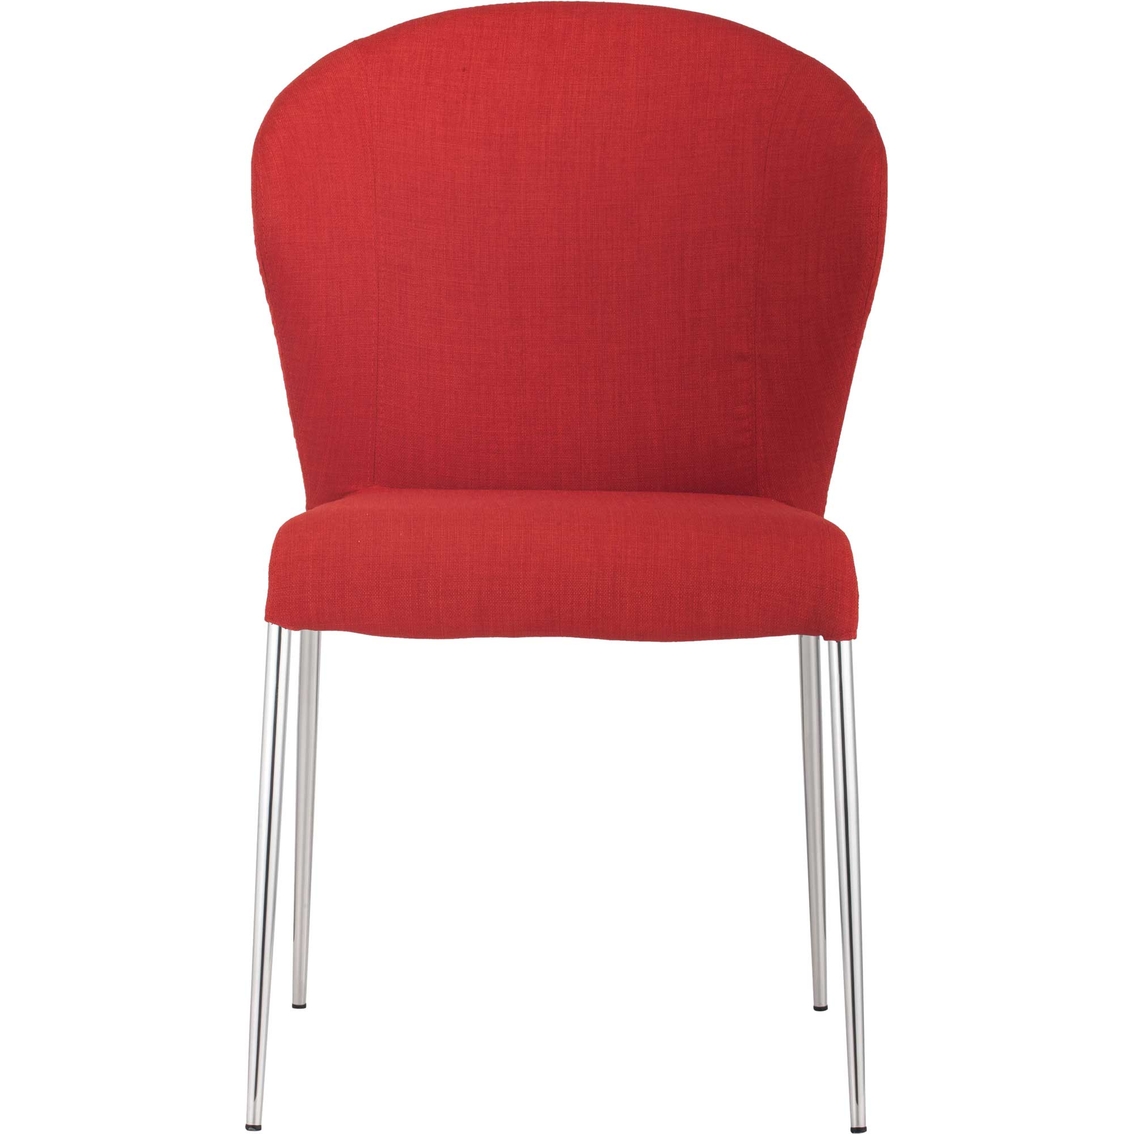 Zuo Oulu Dining Chair 4 Pk. - Image 3 of 8